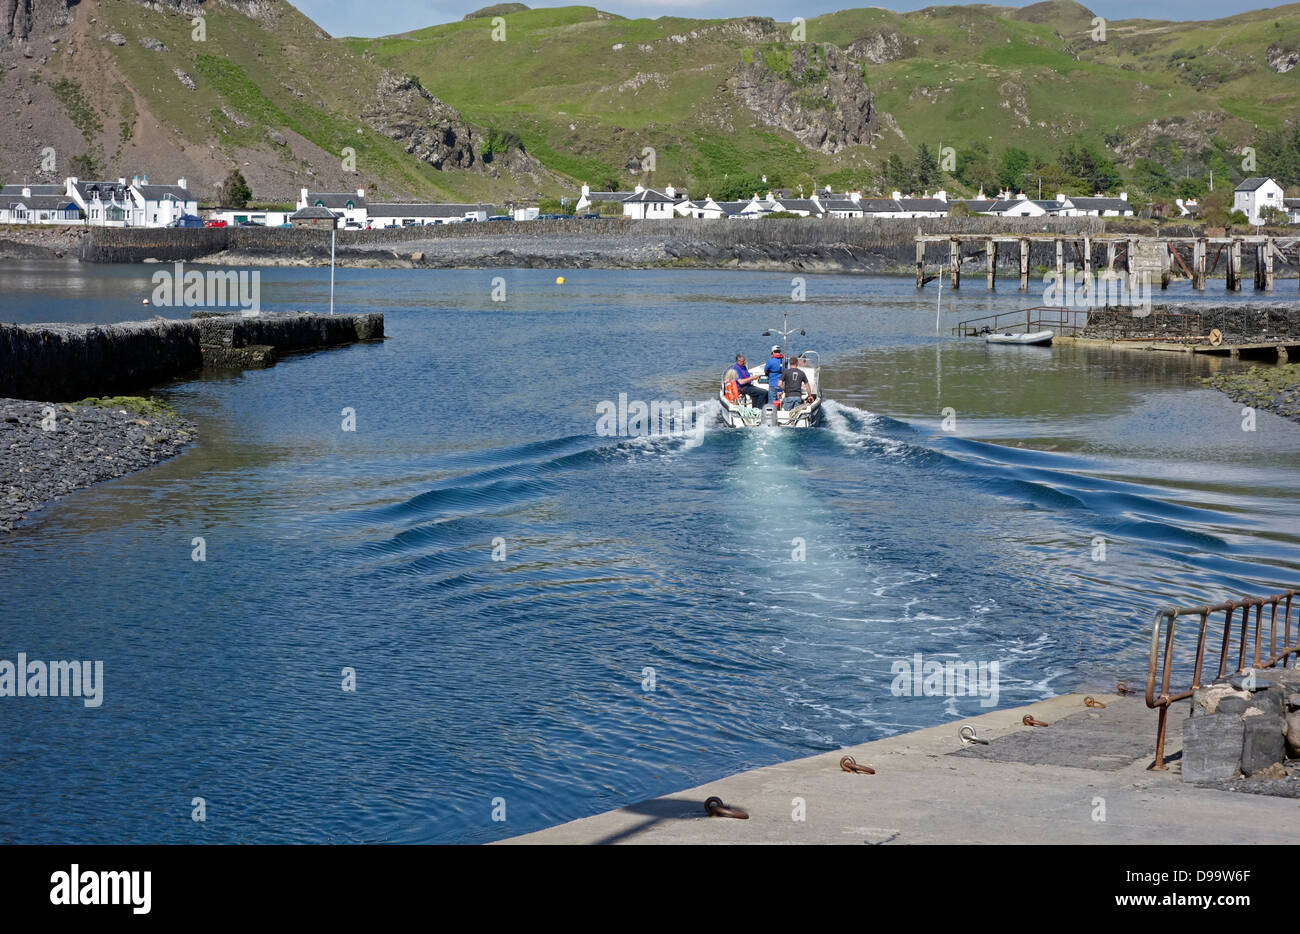 The small passenger ferry is leaving the Island of Easdale and heading towards Easdale town on the island of Seil in Scotland Stock Photo